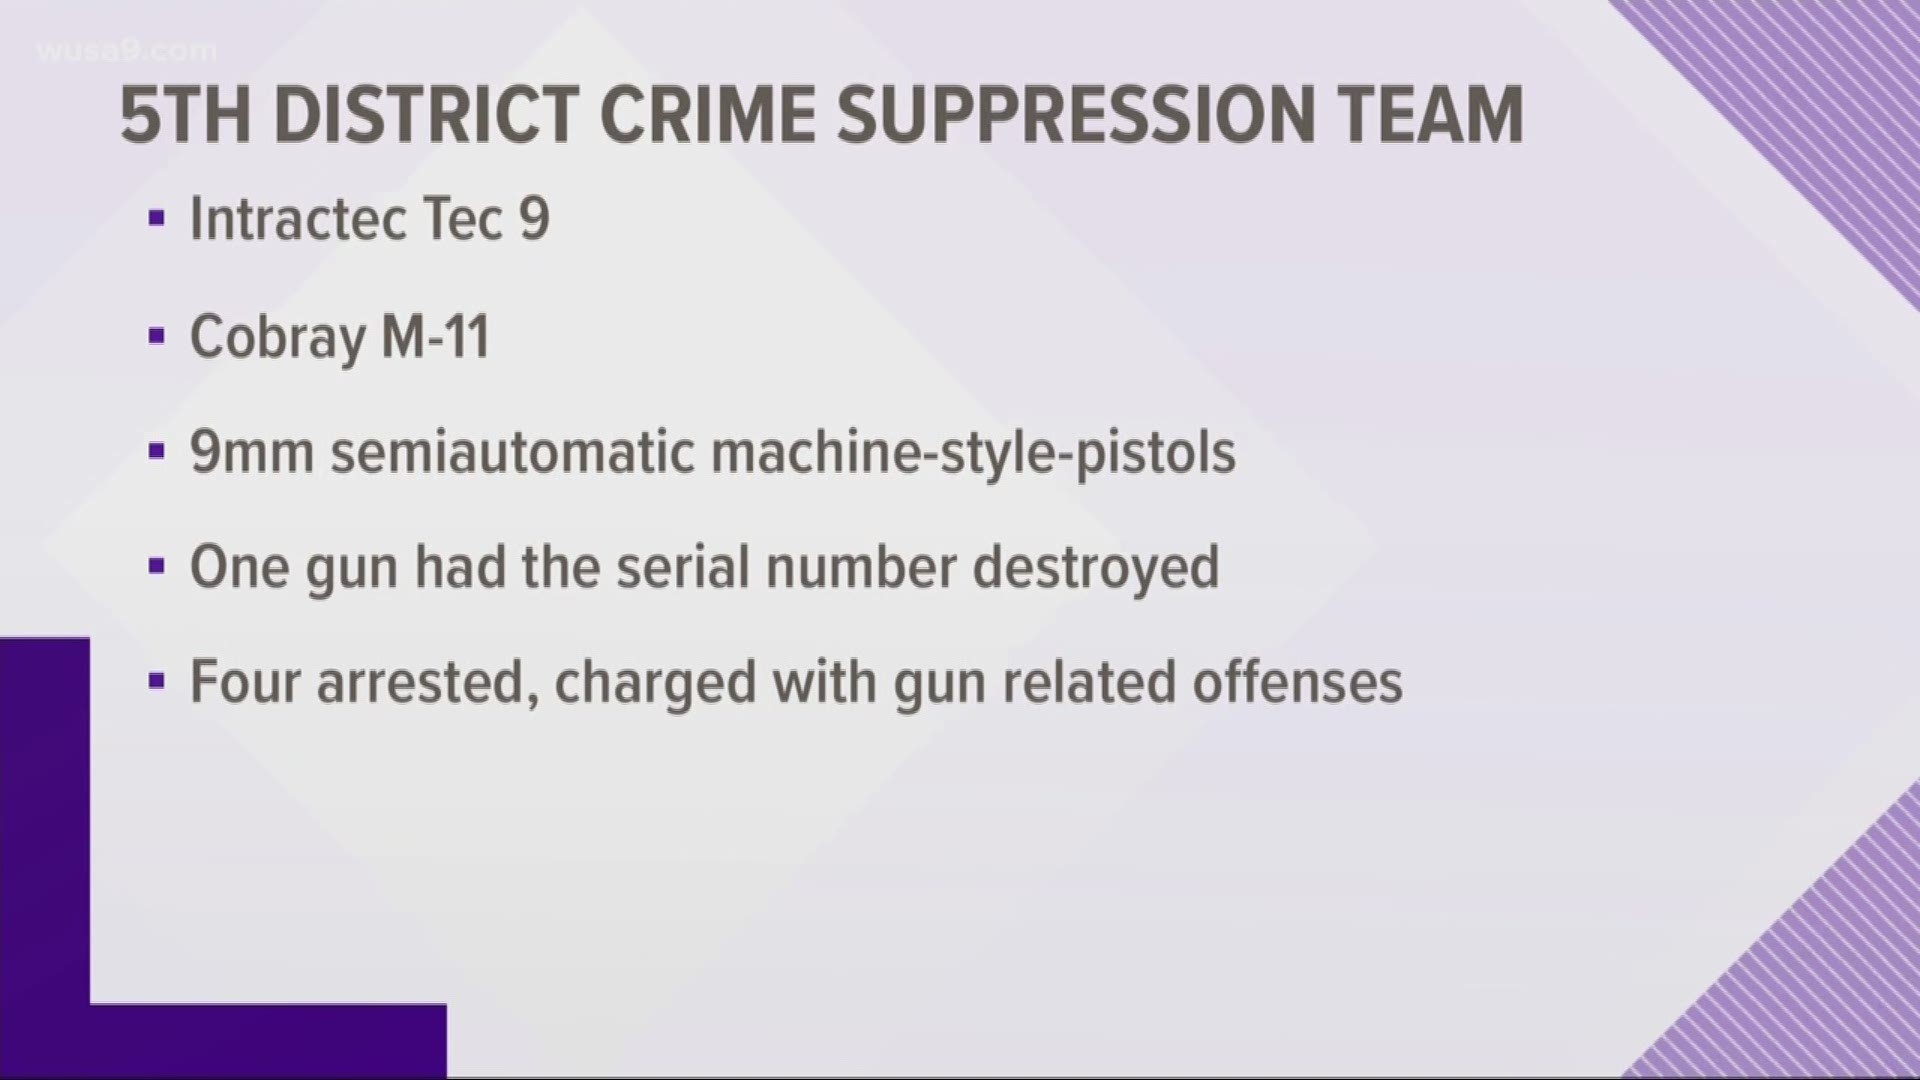 According to MPD, the people found with these guns were in possession of them illegally along with several rounds of ammunition.